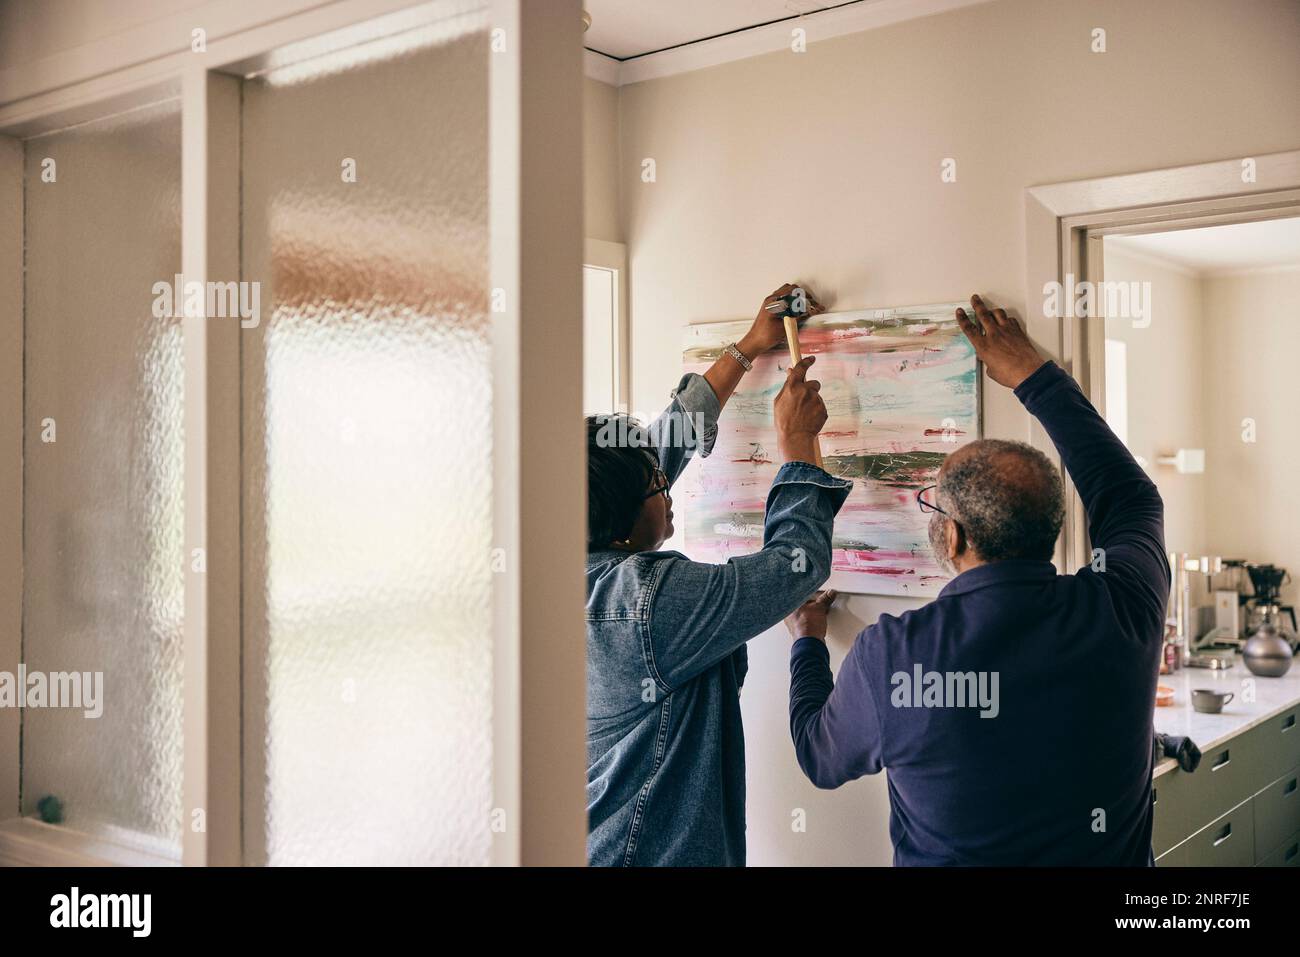 Rear view of senior man assisting woman hanging up painting on wall at home Stock Photo